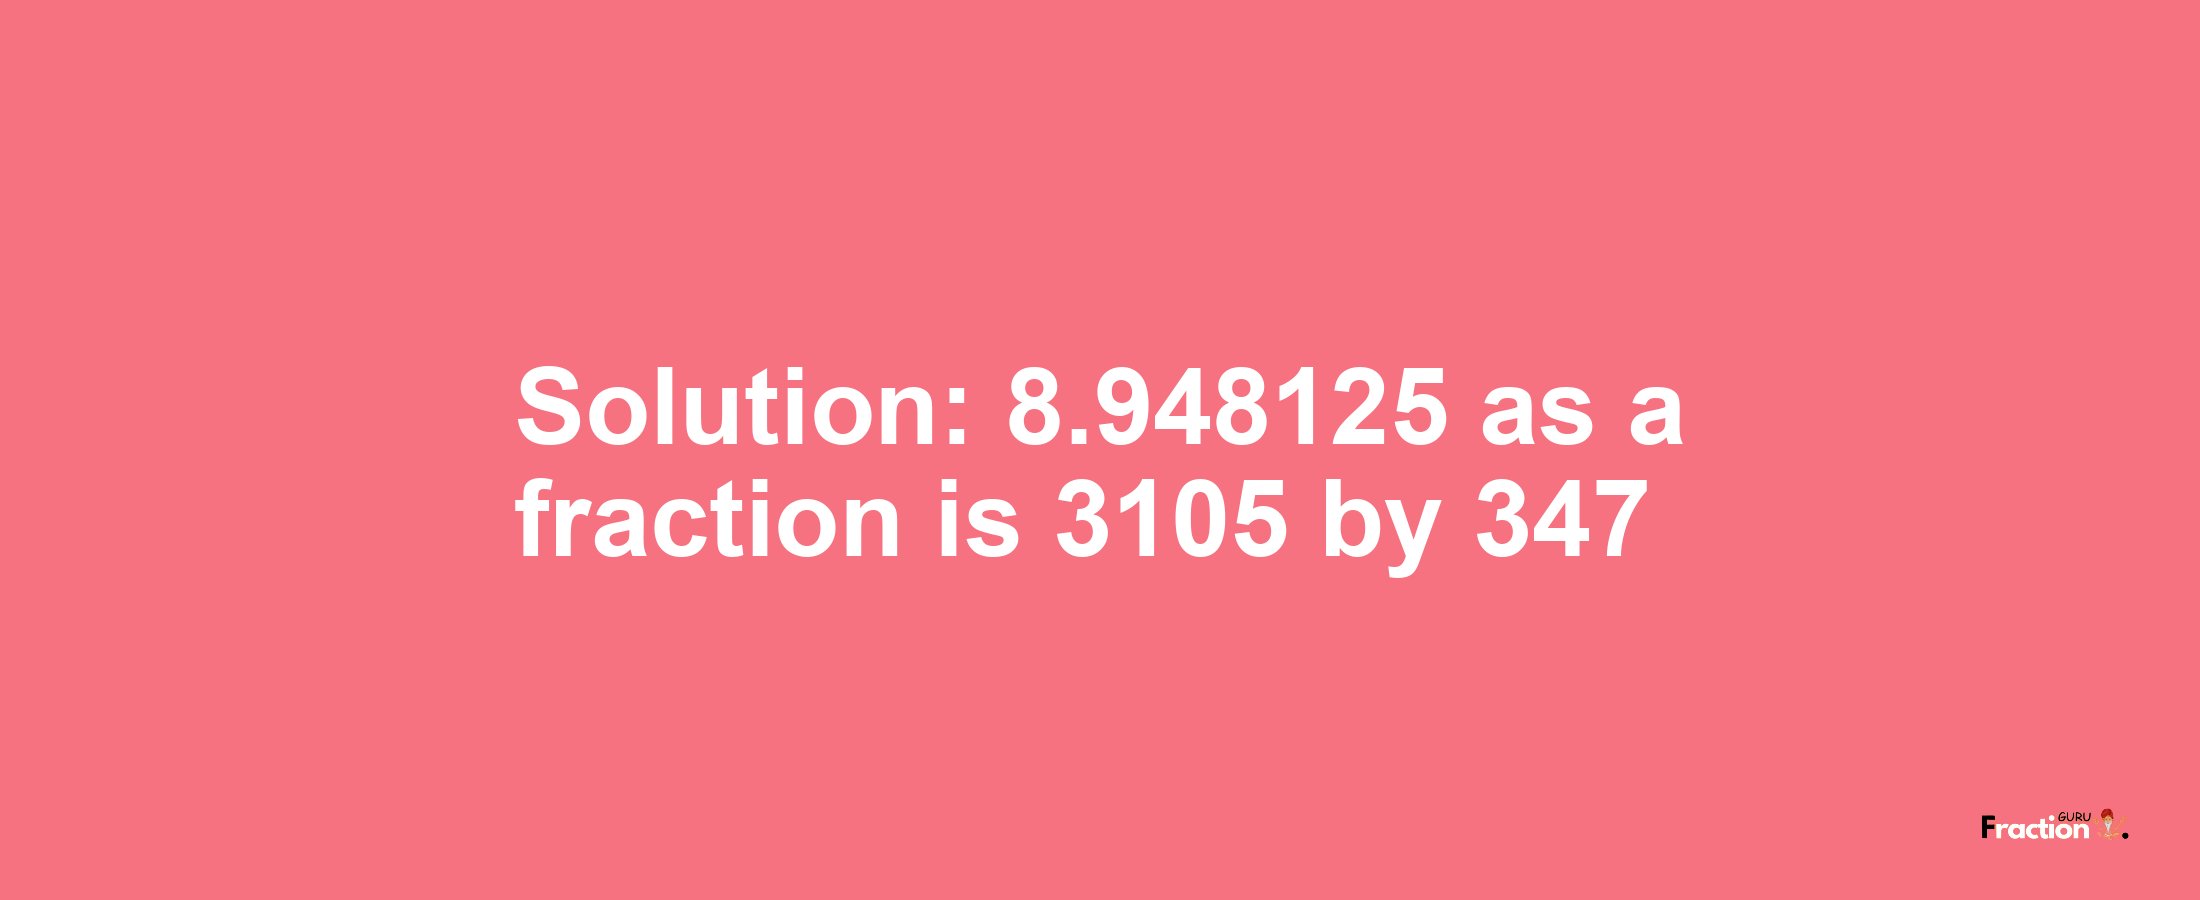 Solution:8.948125 as a fraction is 3105/347